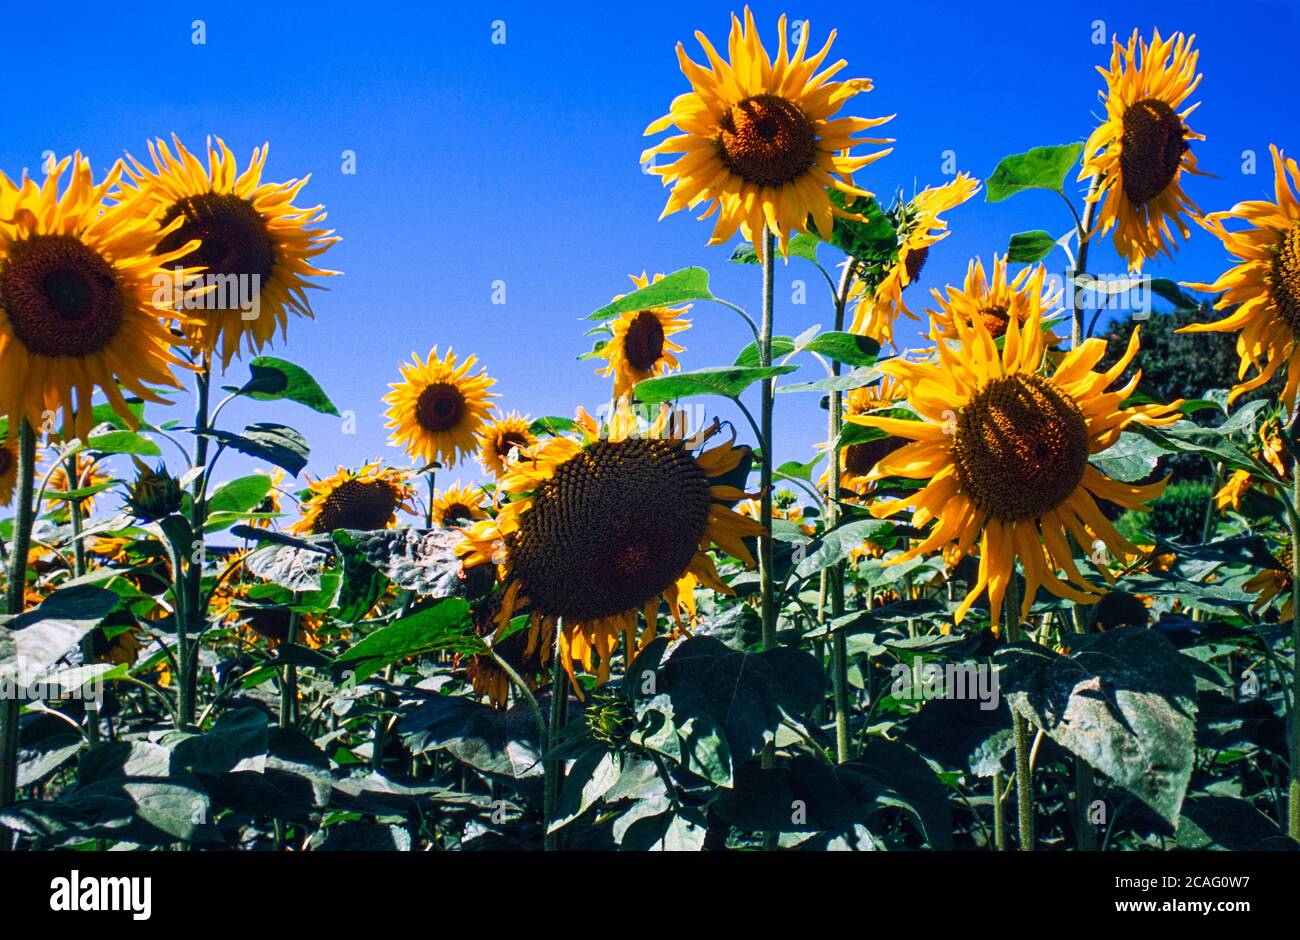 Archive image: Sunflowers in bloom under blue sky, France, c 2005 Stock Photo